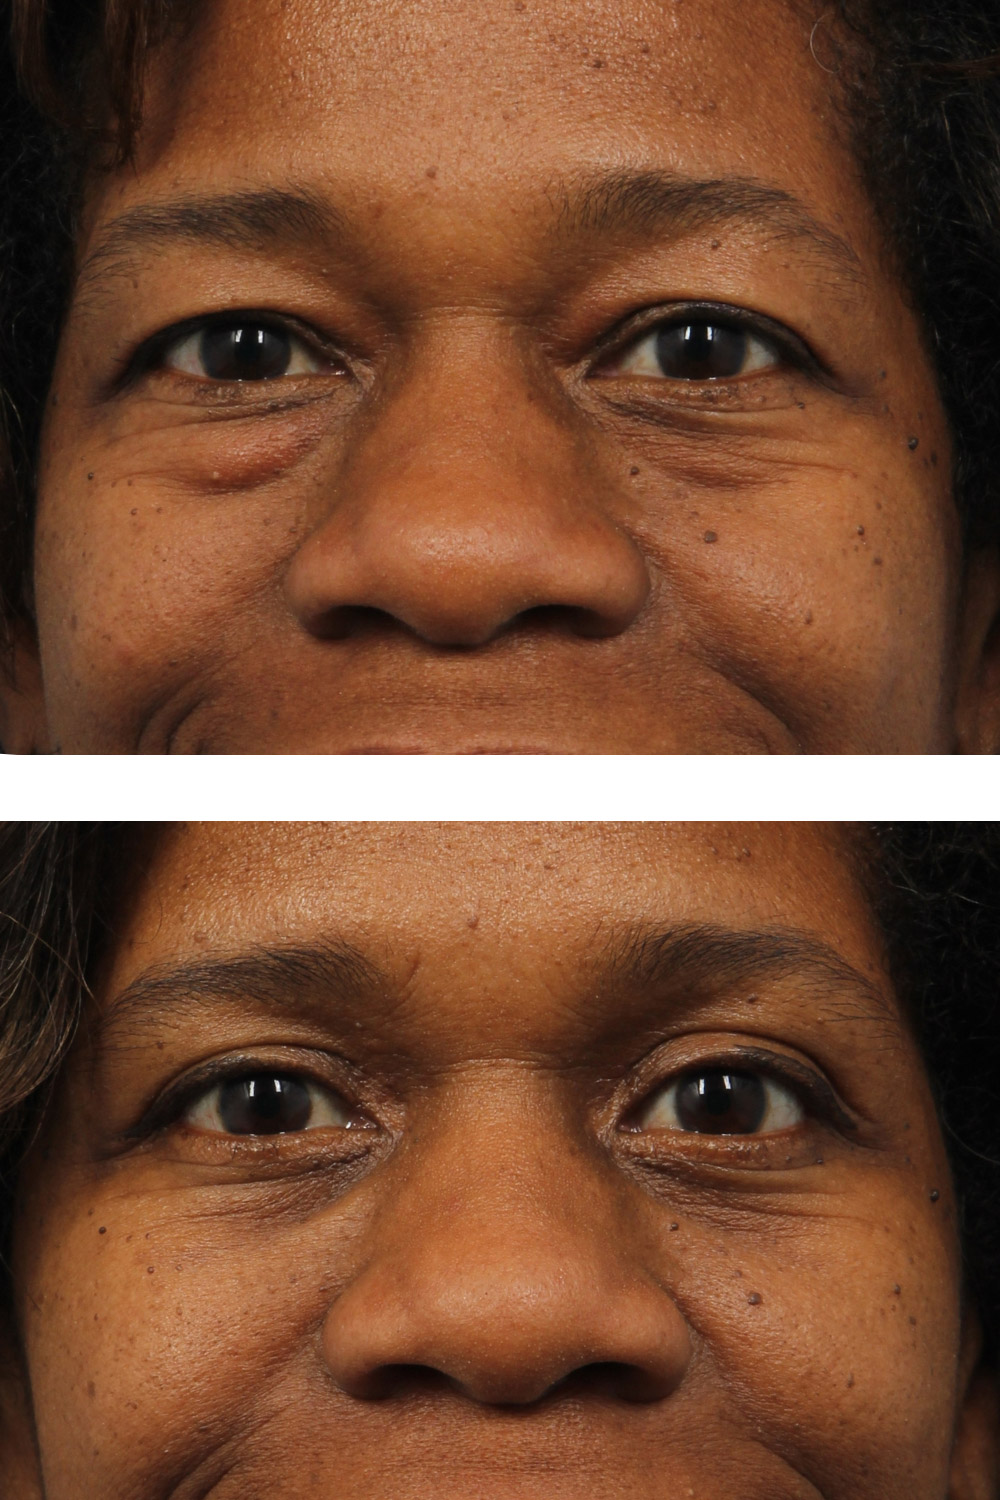 Lower and upper blepharoplasty (eyelid surgery) 50-year-old woman with dark skin